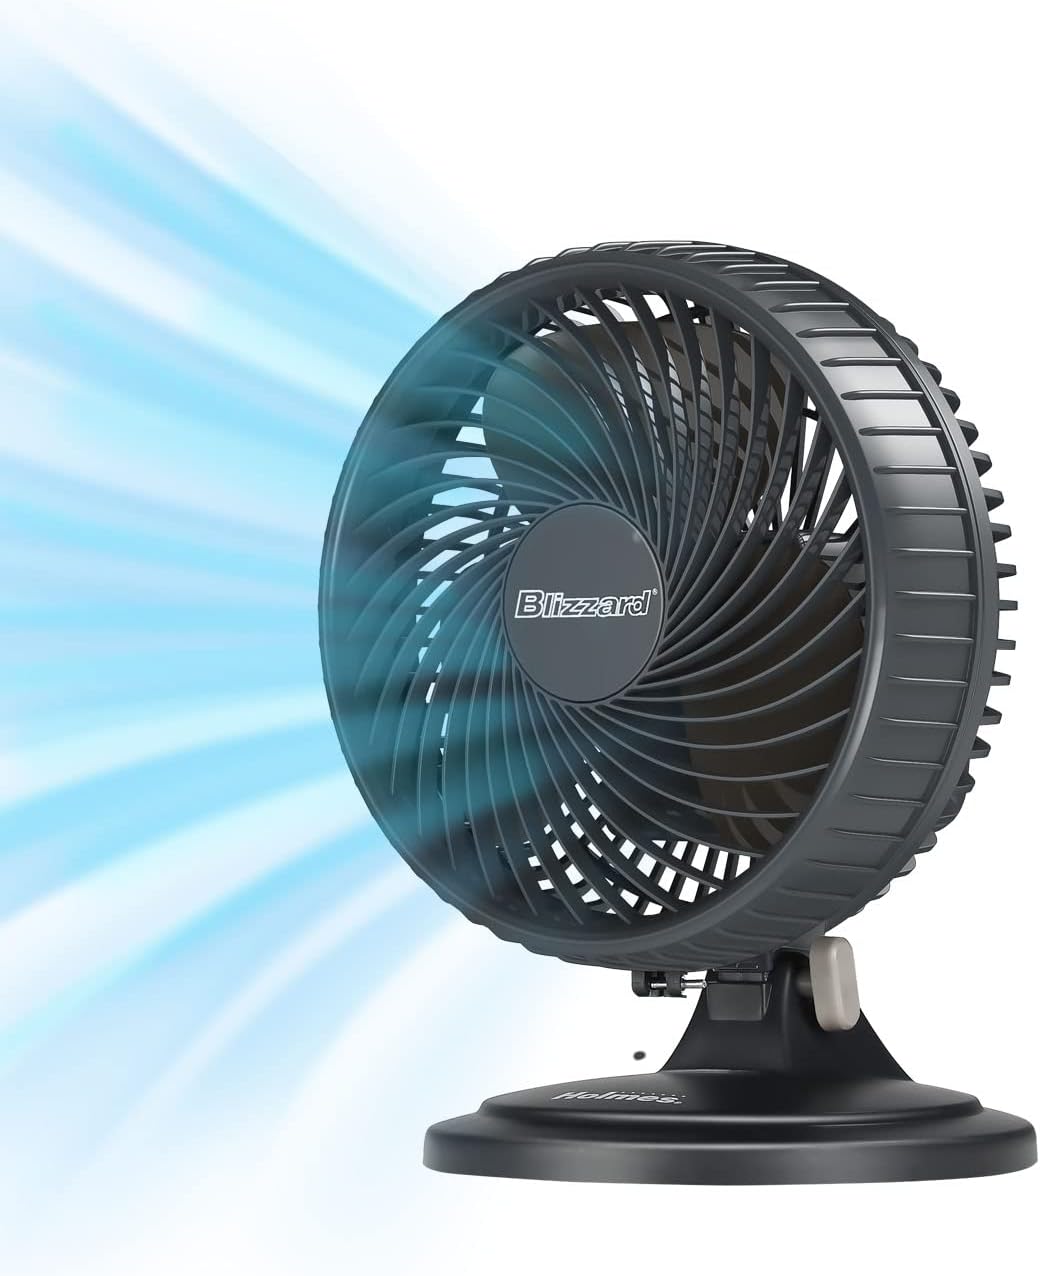 HOLMES BLIZZARD 7 Table Fan, 2 Speeds, 3 Blades, 85 Oscillation, 20 Adjustable Head, Home, Bedroom and Office, Charcoal Matte